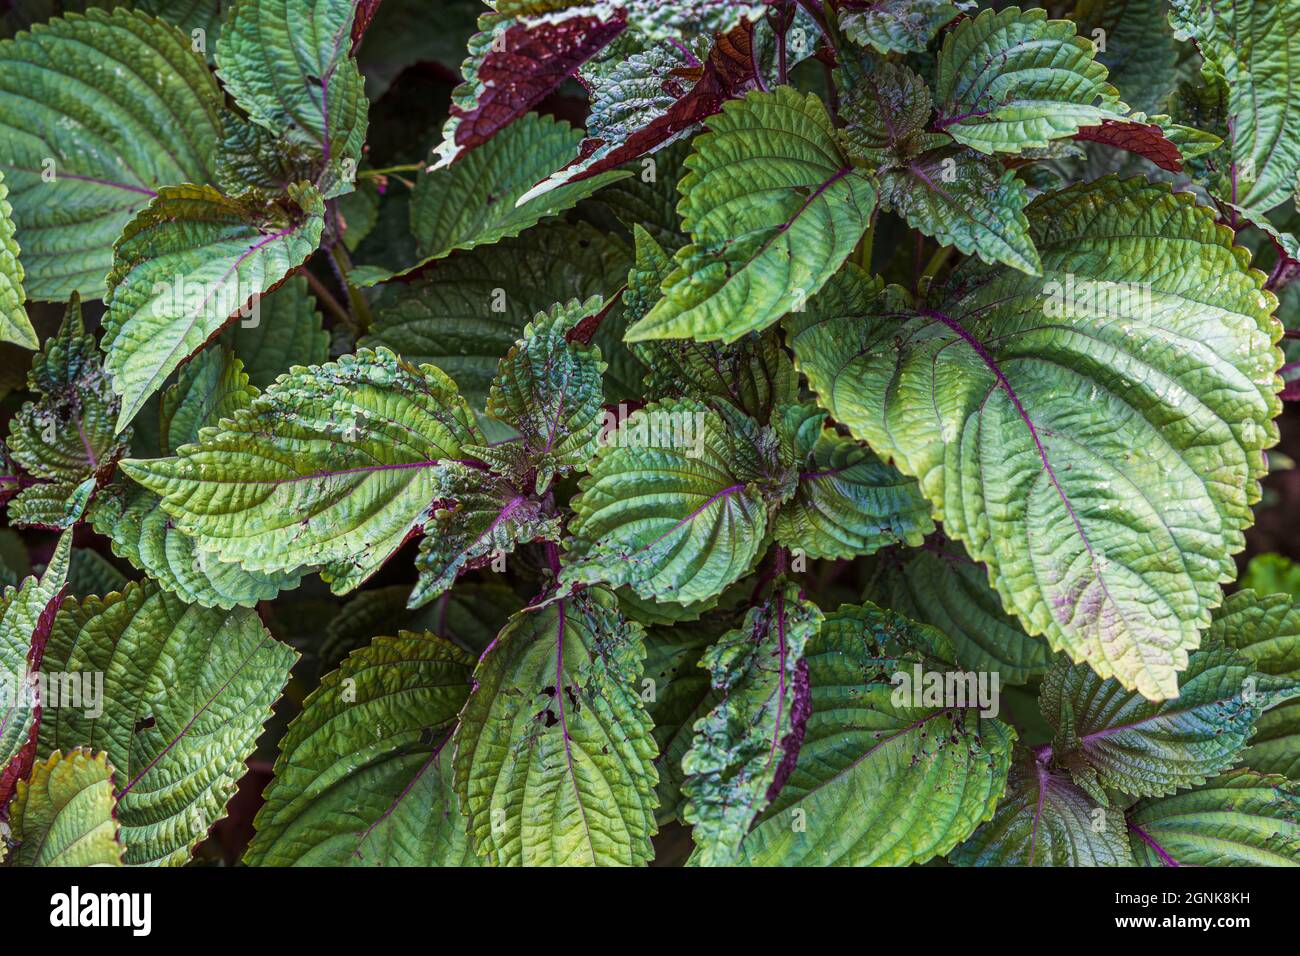 Close-up view of  eye-catching green leaves with beautifully rich red underside Perilla Frutescens Briton Shiso for use in cooking. Sweden. Stock Photo